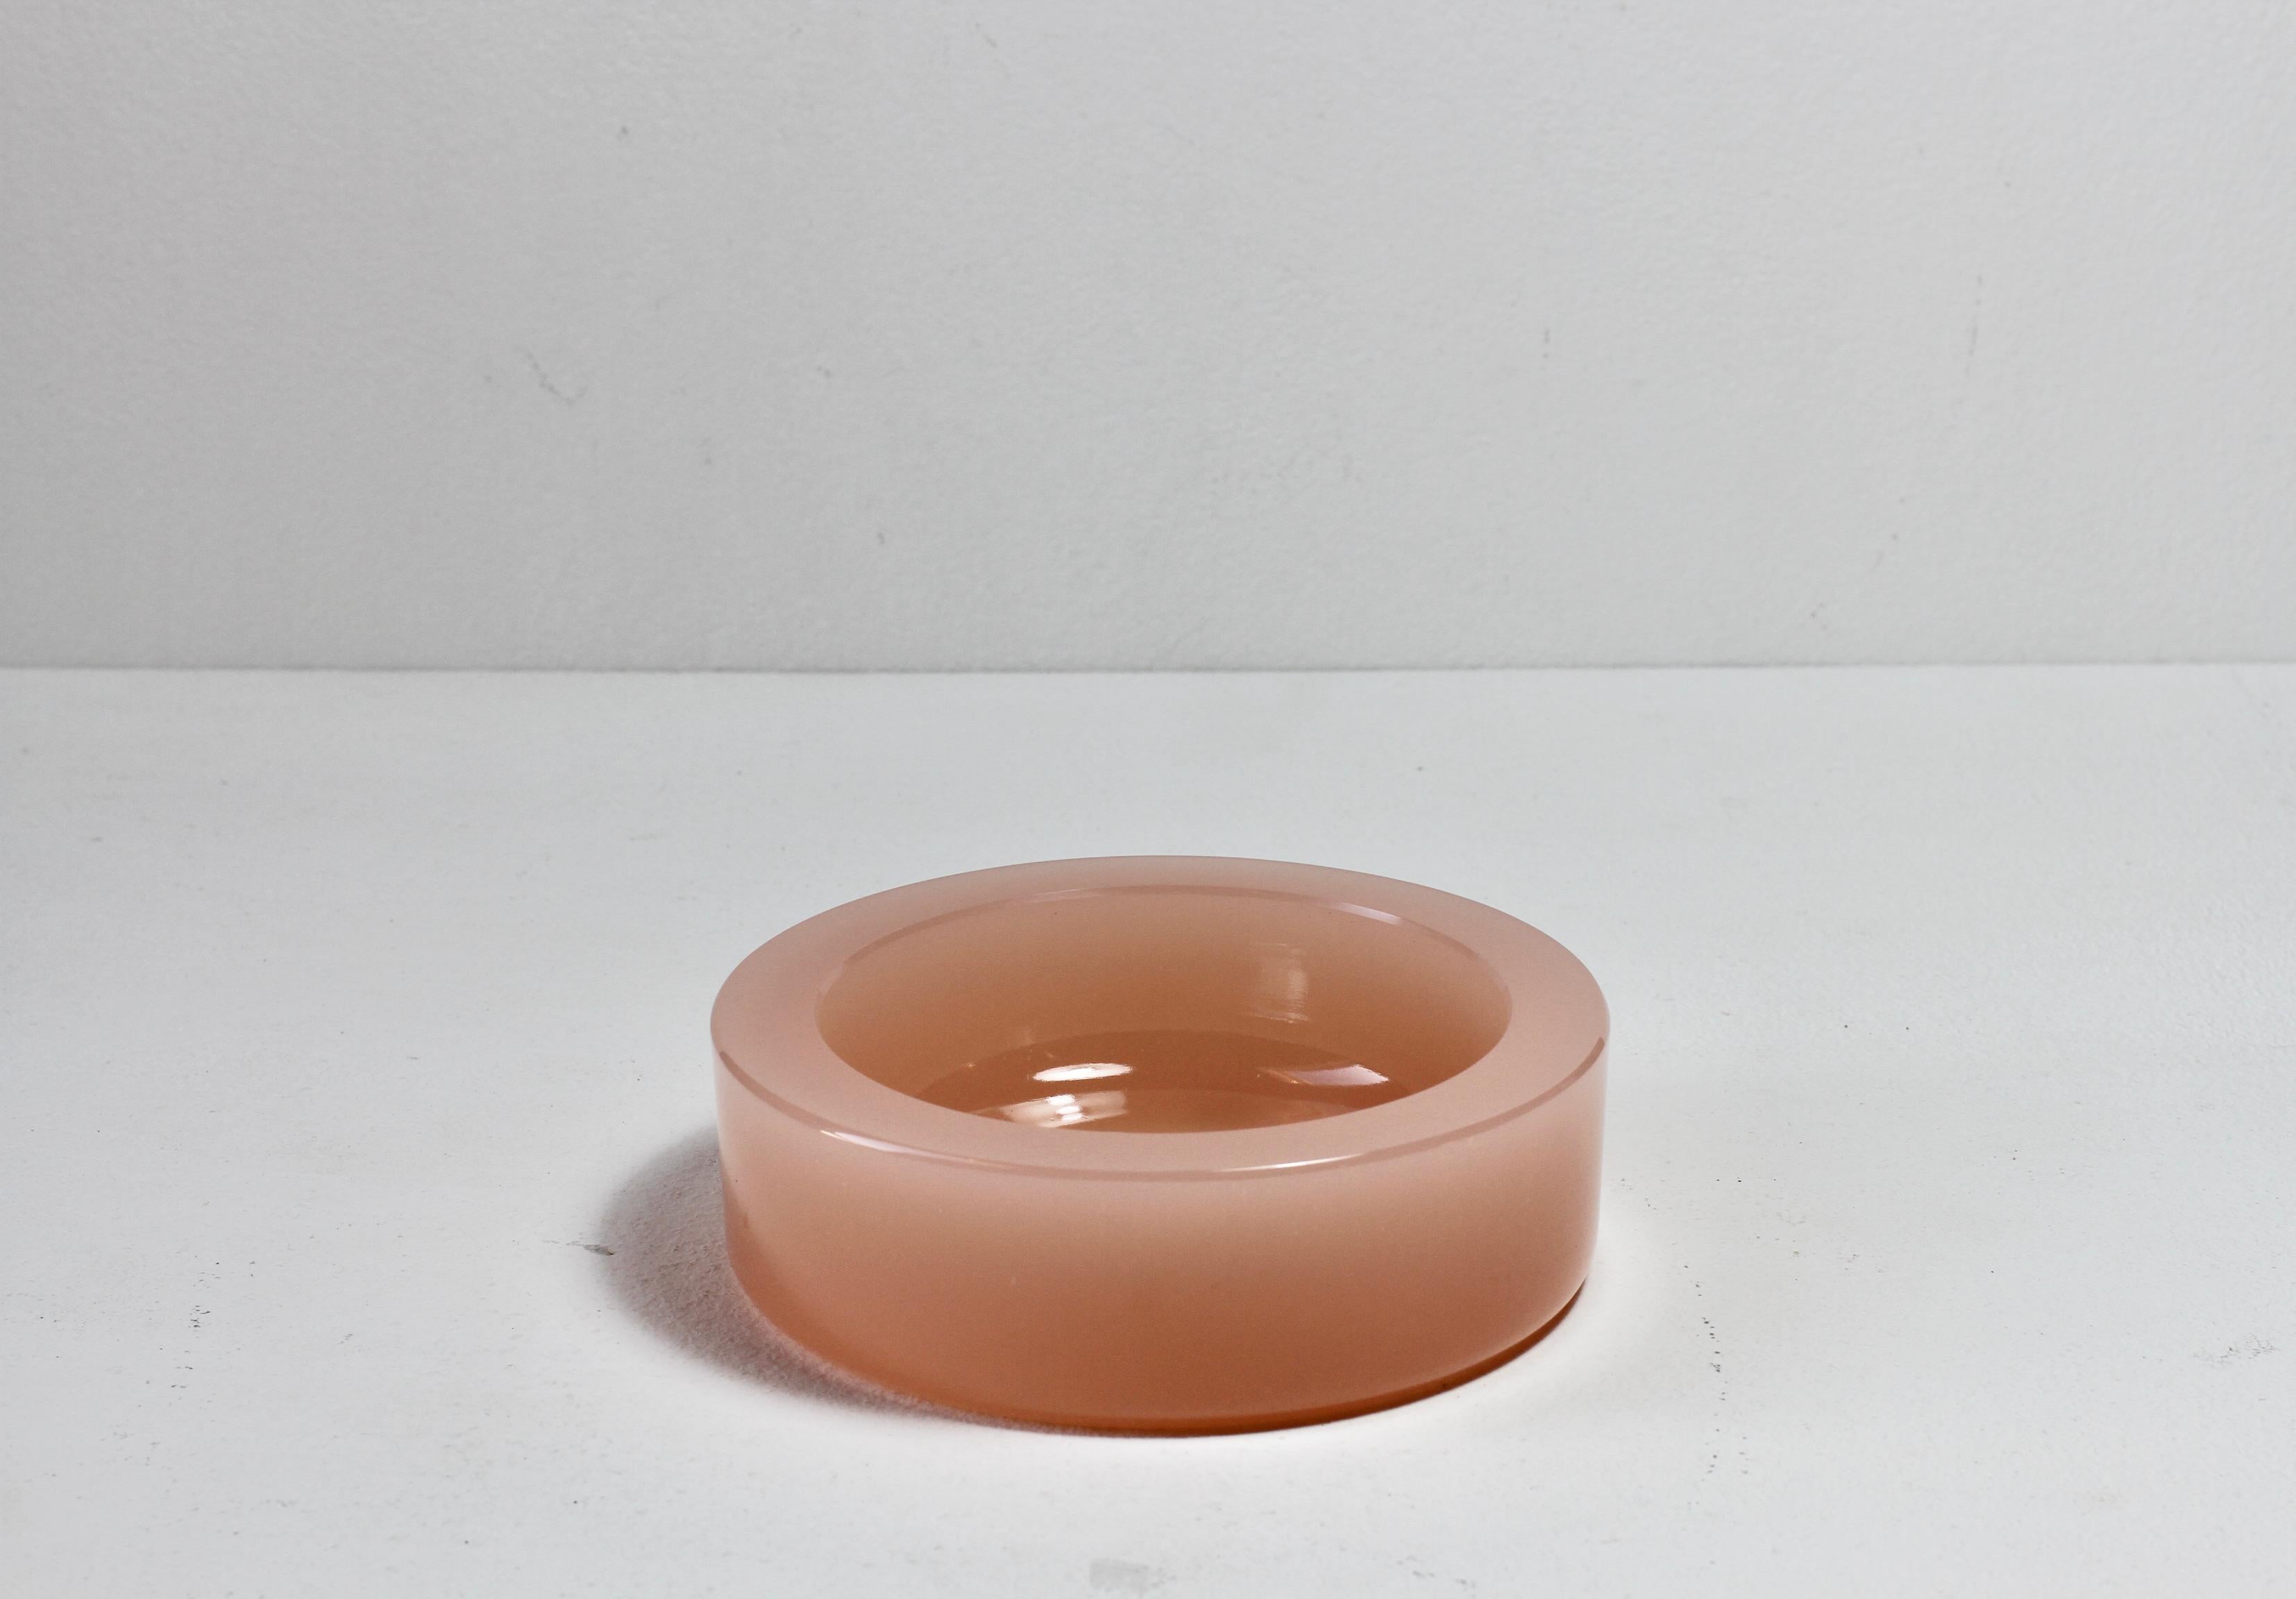 Cenedese Venetian Mid-Century vintage modern pretty Murano opaline pink colored / coloured glass round circular dishes, bowls or ashtrays. Wonderful vintage Mid-Century Italian glass and perfect for serving sweets or snacks in the kitchen, lounge.